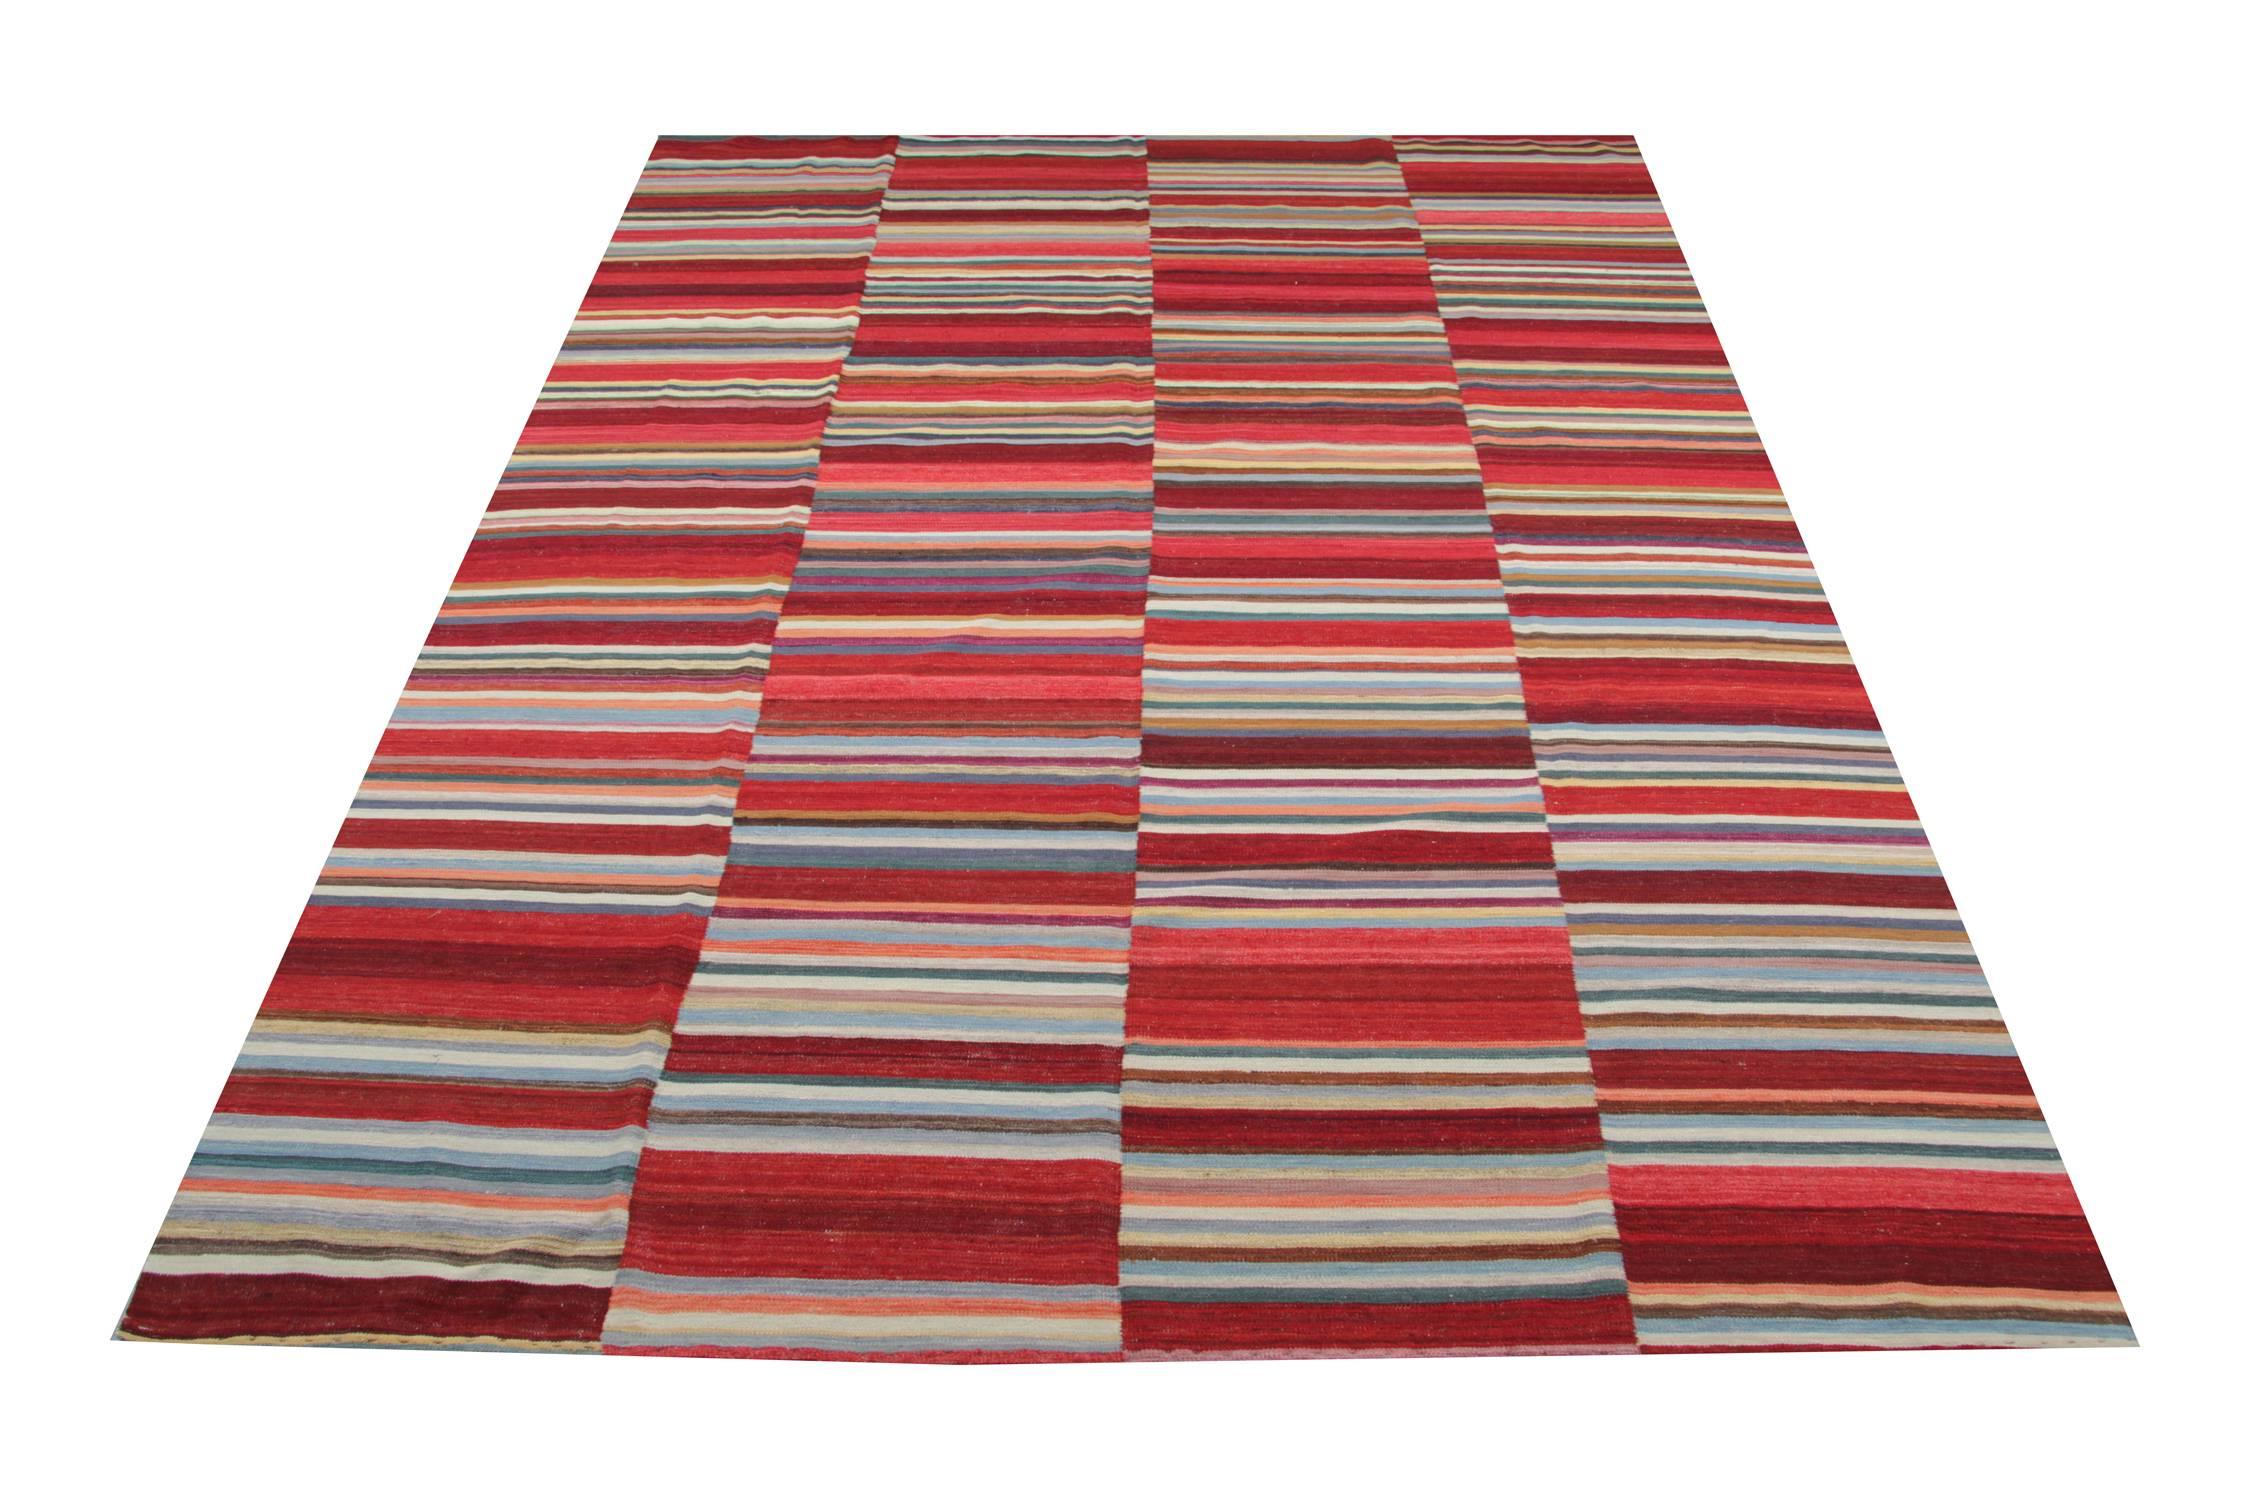 This striped rug is a kind of  Kilims indicating a particular flat weave rug. It has been handmade rugs in Afghanistan with the best wool and cotton by skillful weavers. Also, the high materials are of the highest quality wool and cotton are locally